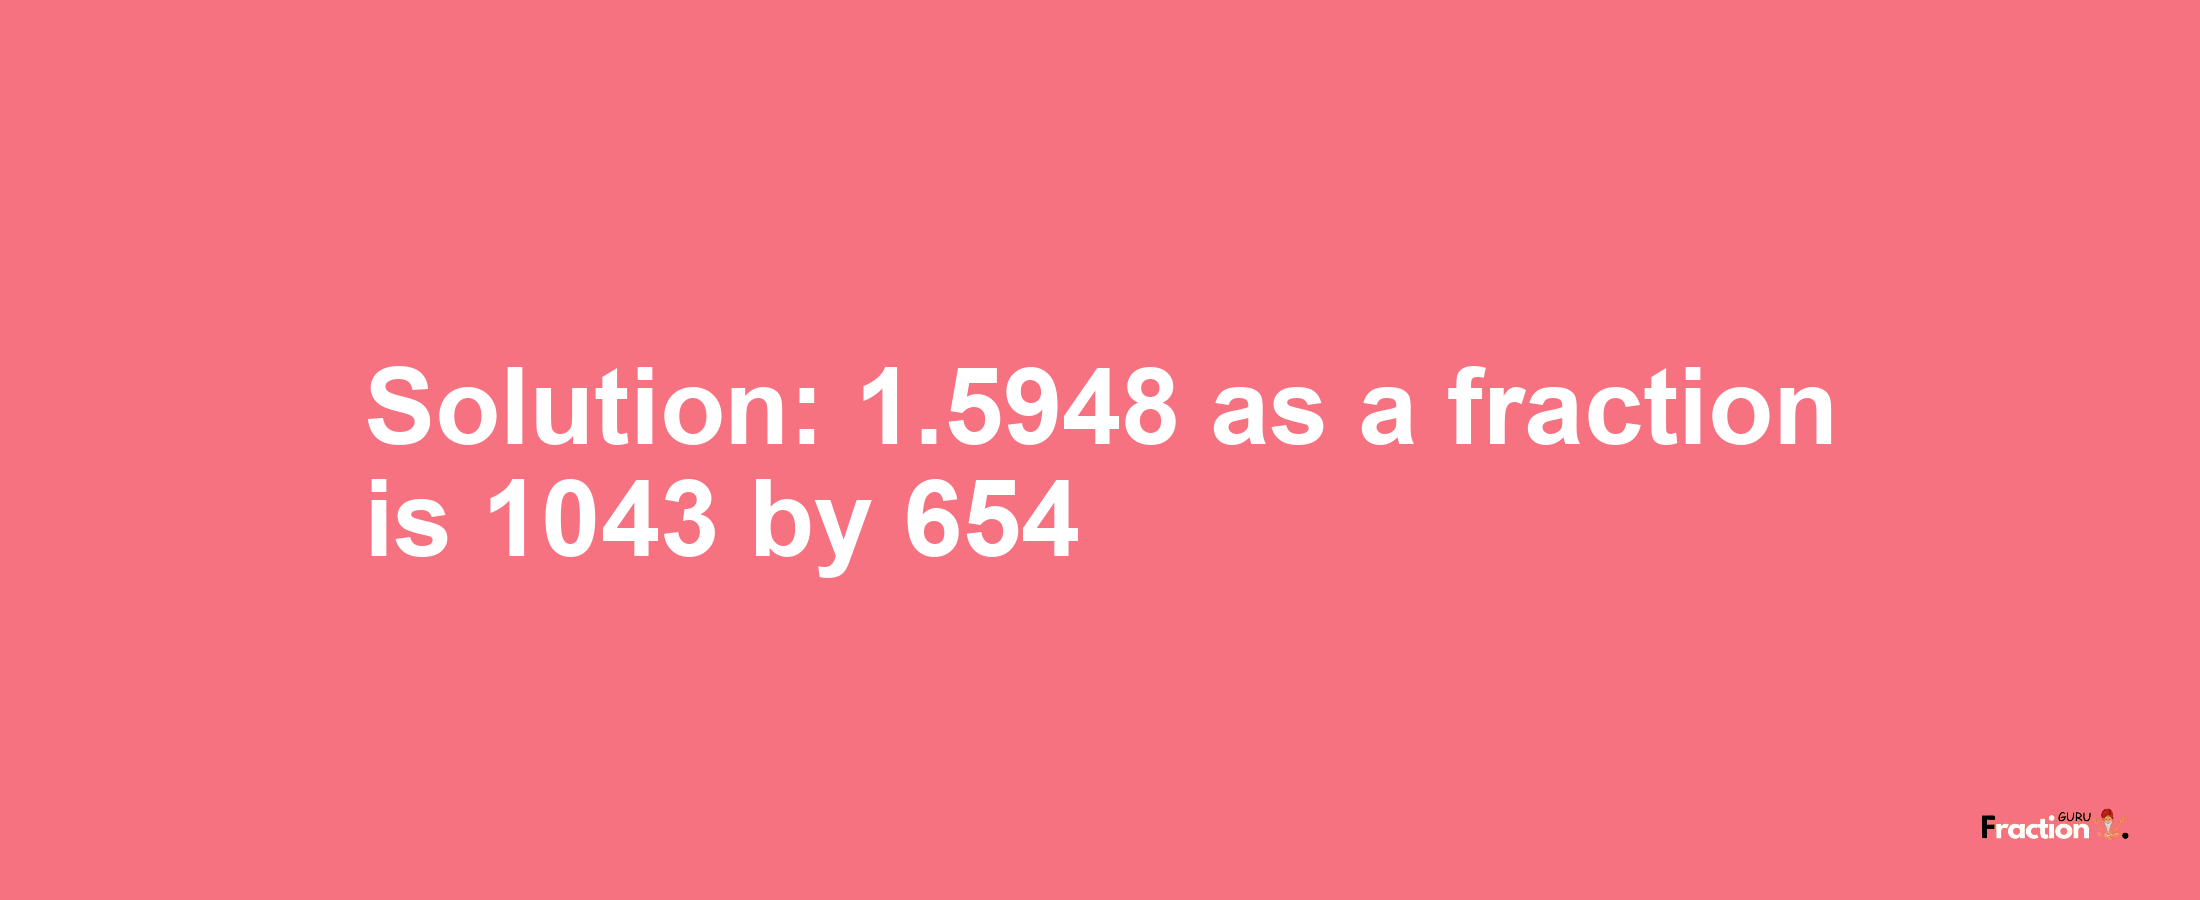 Solution:1.5948 as a fraction is 1043/654